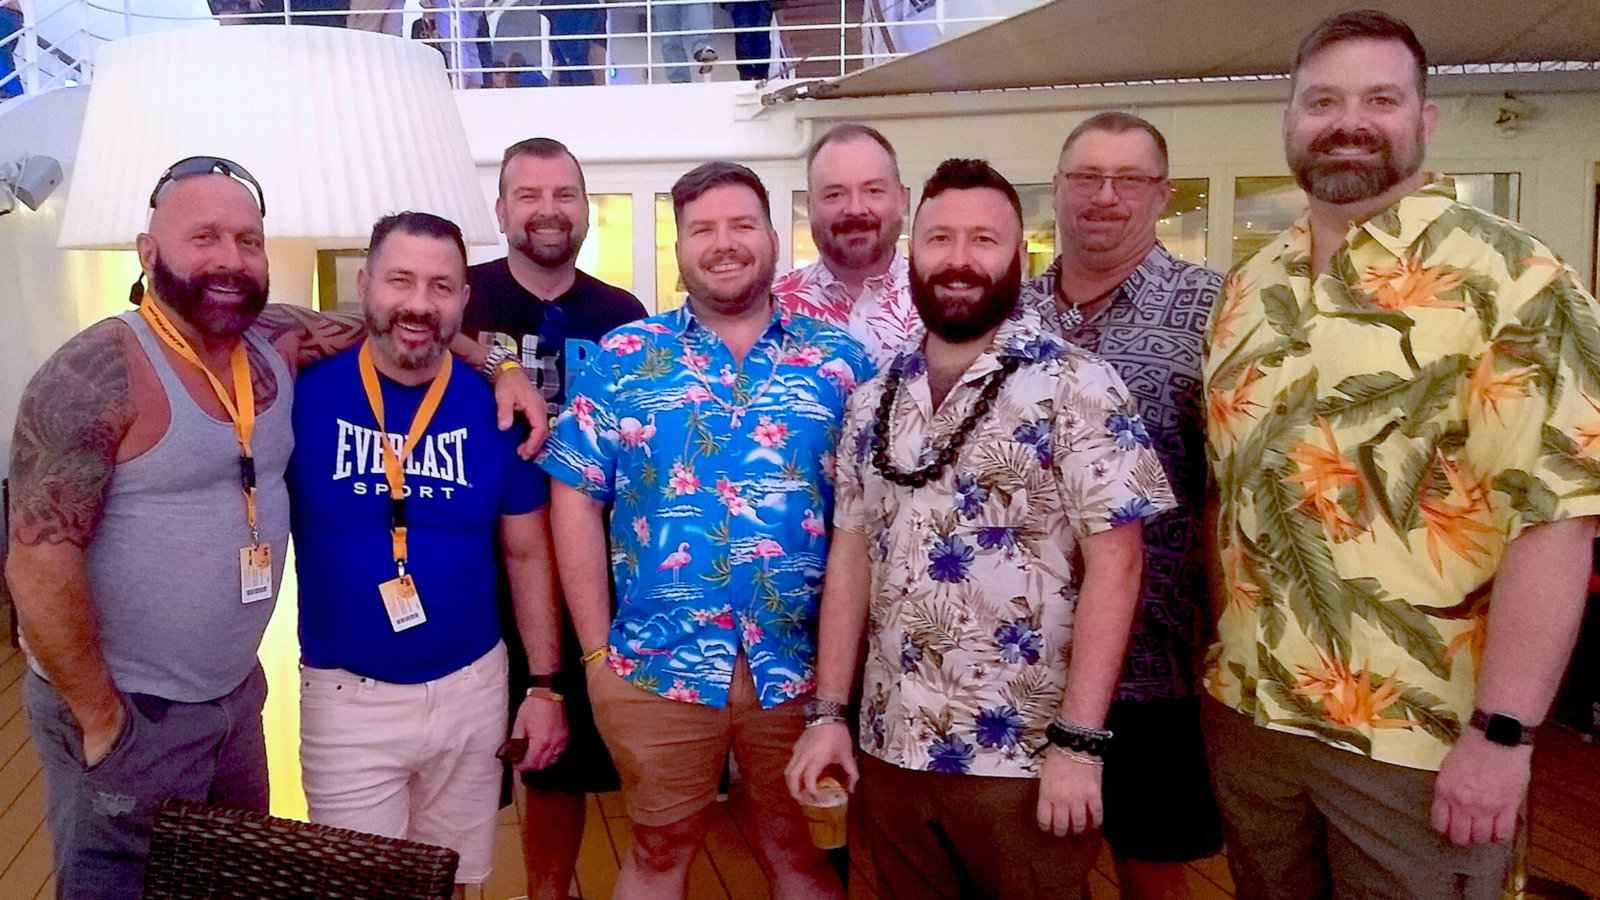 A group of 8 guys posing for a photo together on a cruise ship.